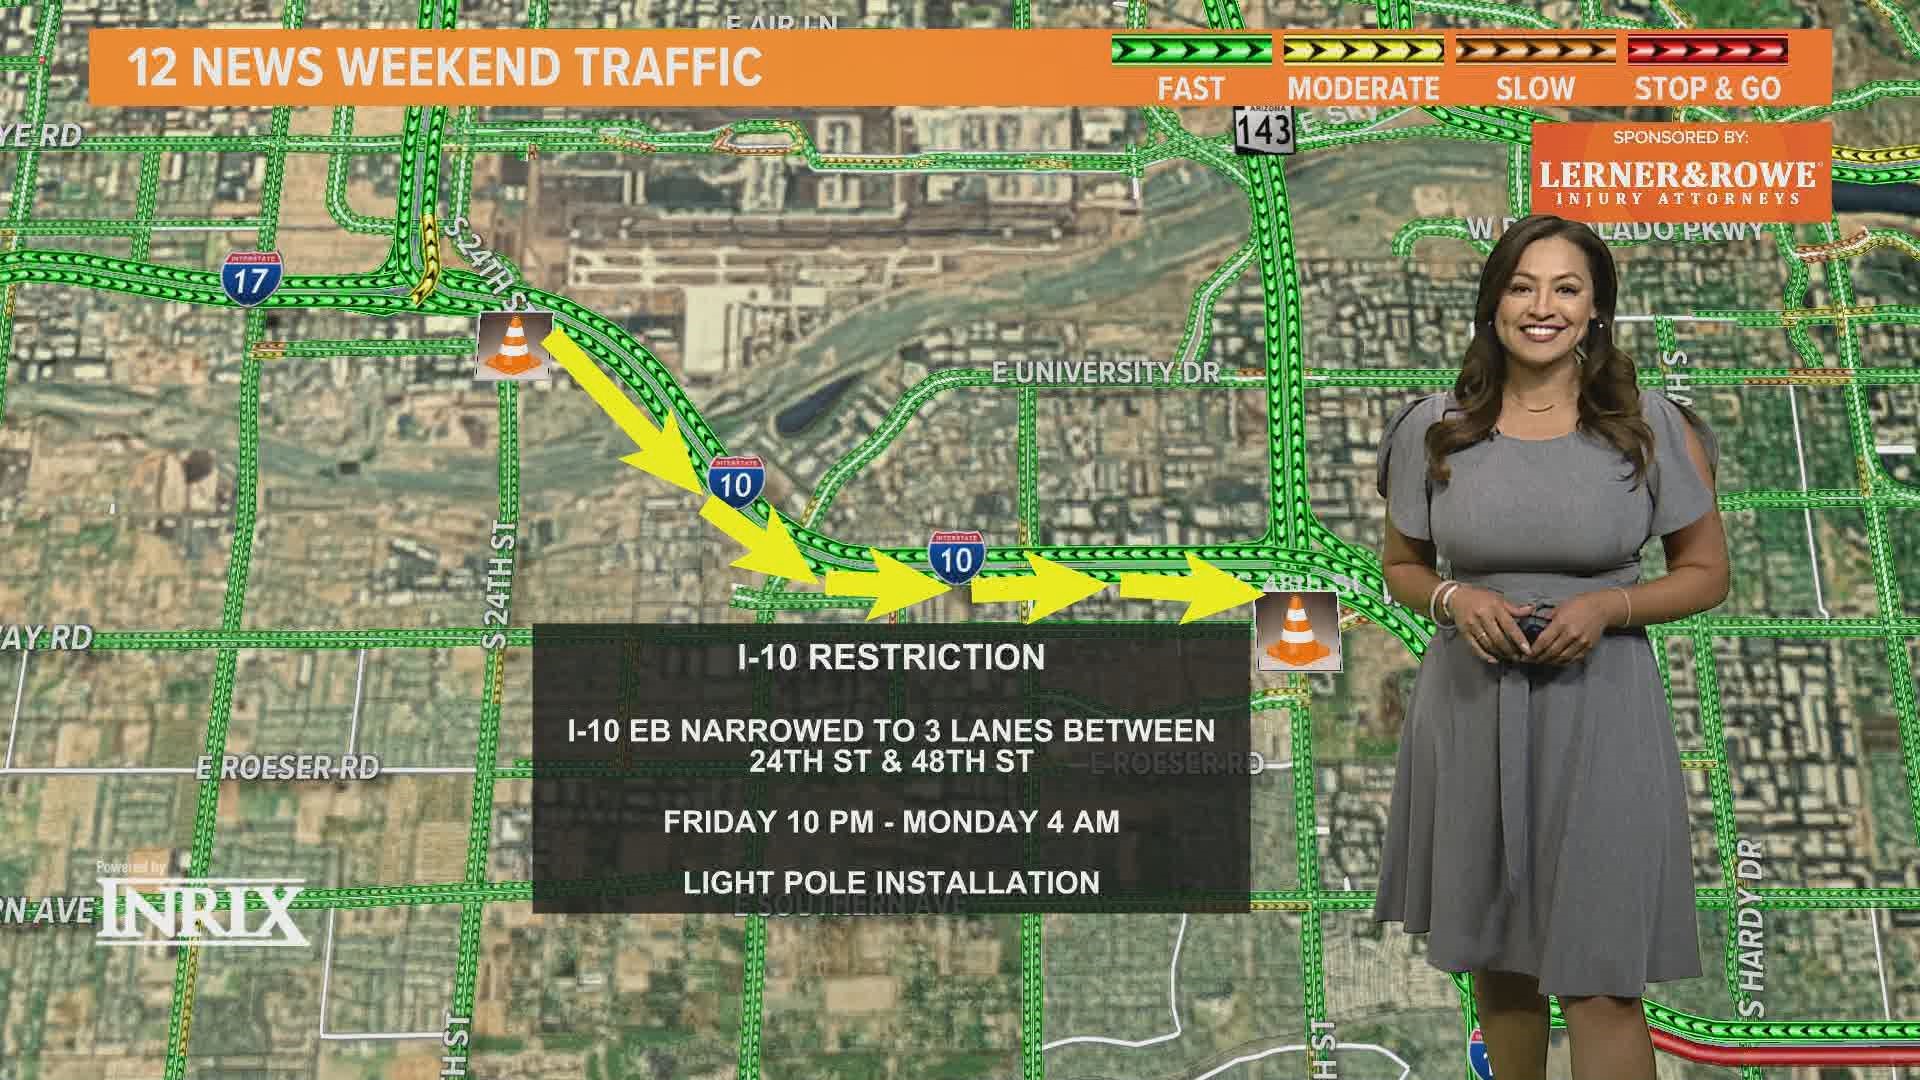 Vanessa Ramirez has the latest updates for all the closures and detours on Valley roads for the weekend of May 13, 2022.